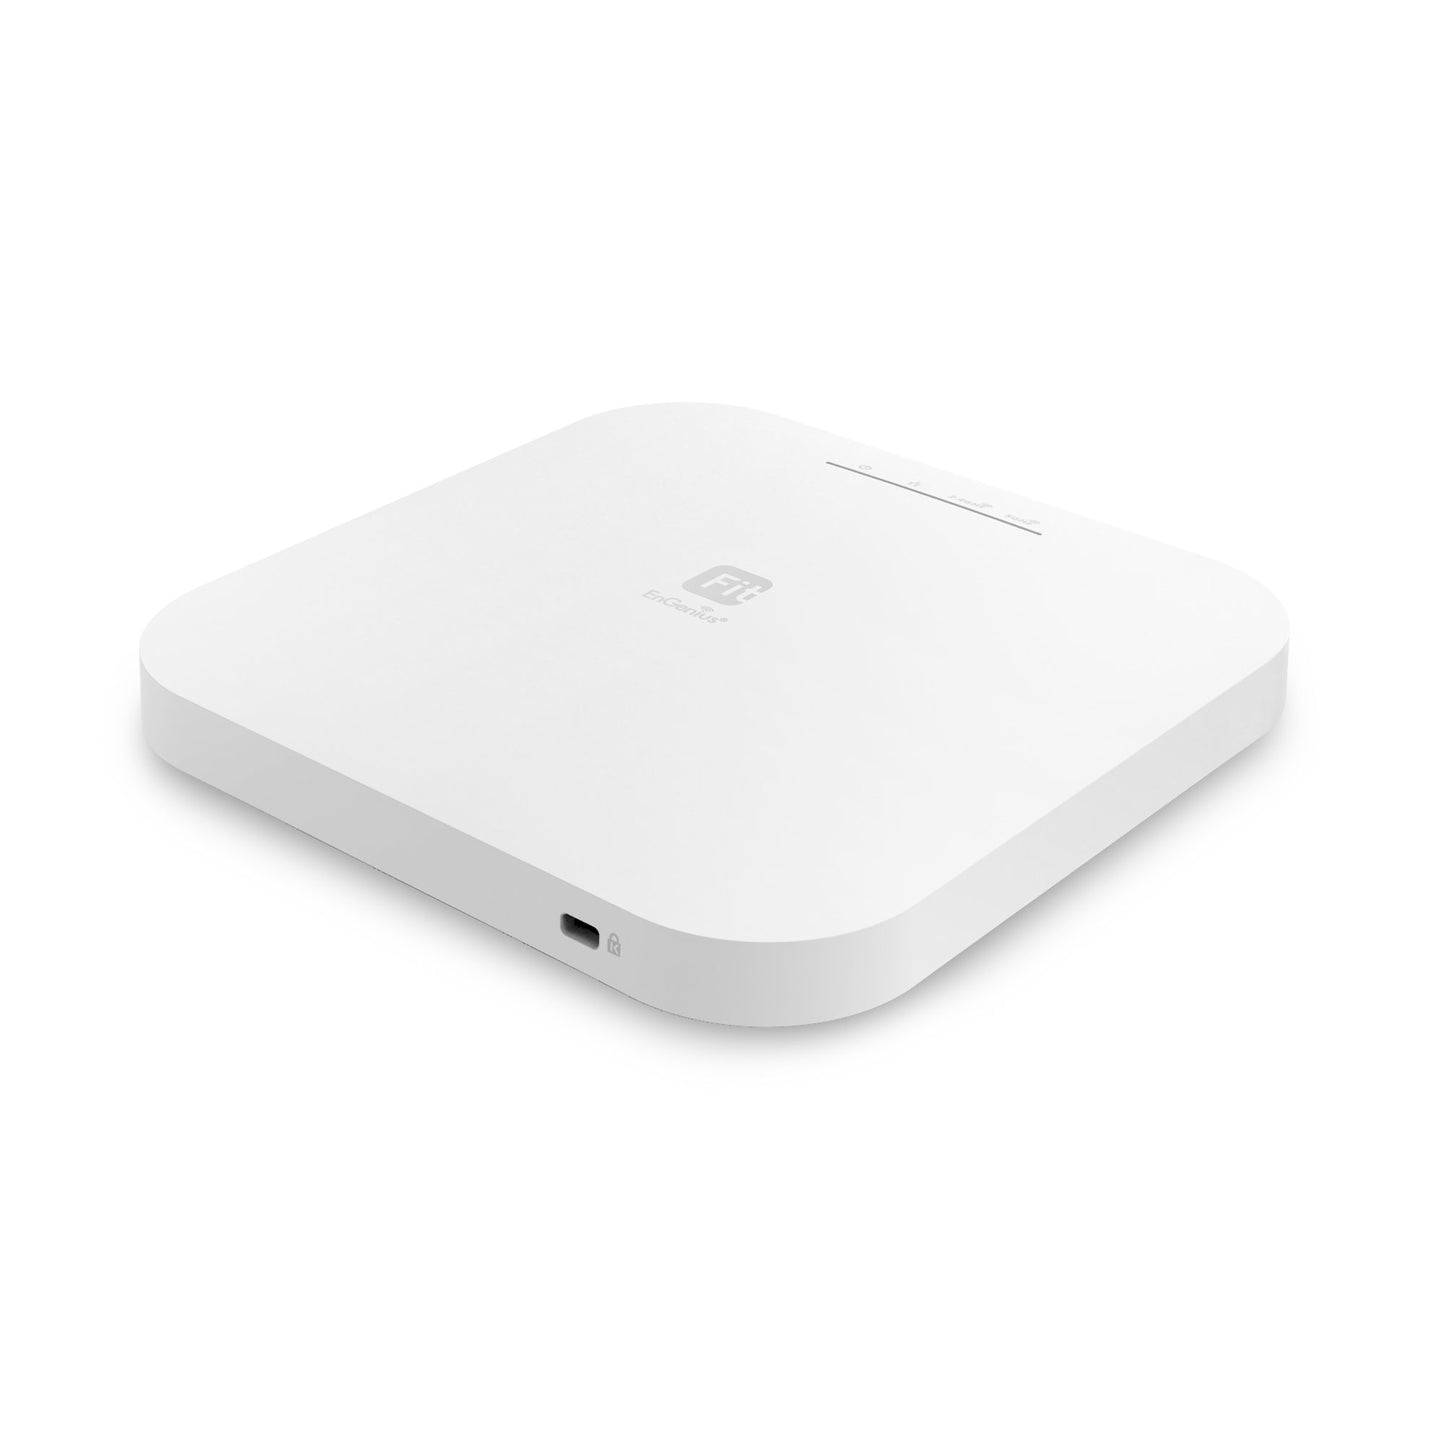 EnGenius (Fit) WiFi 6 Access Point (2x2 MU-MIMO) - EWS357-FIT